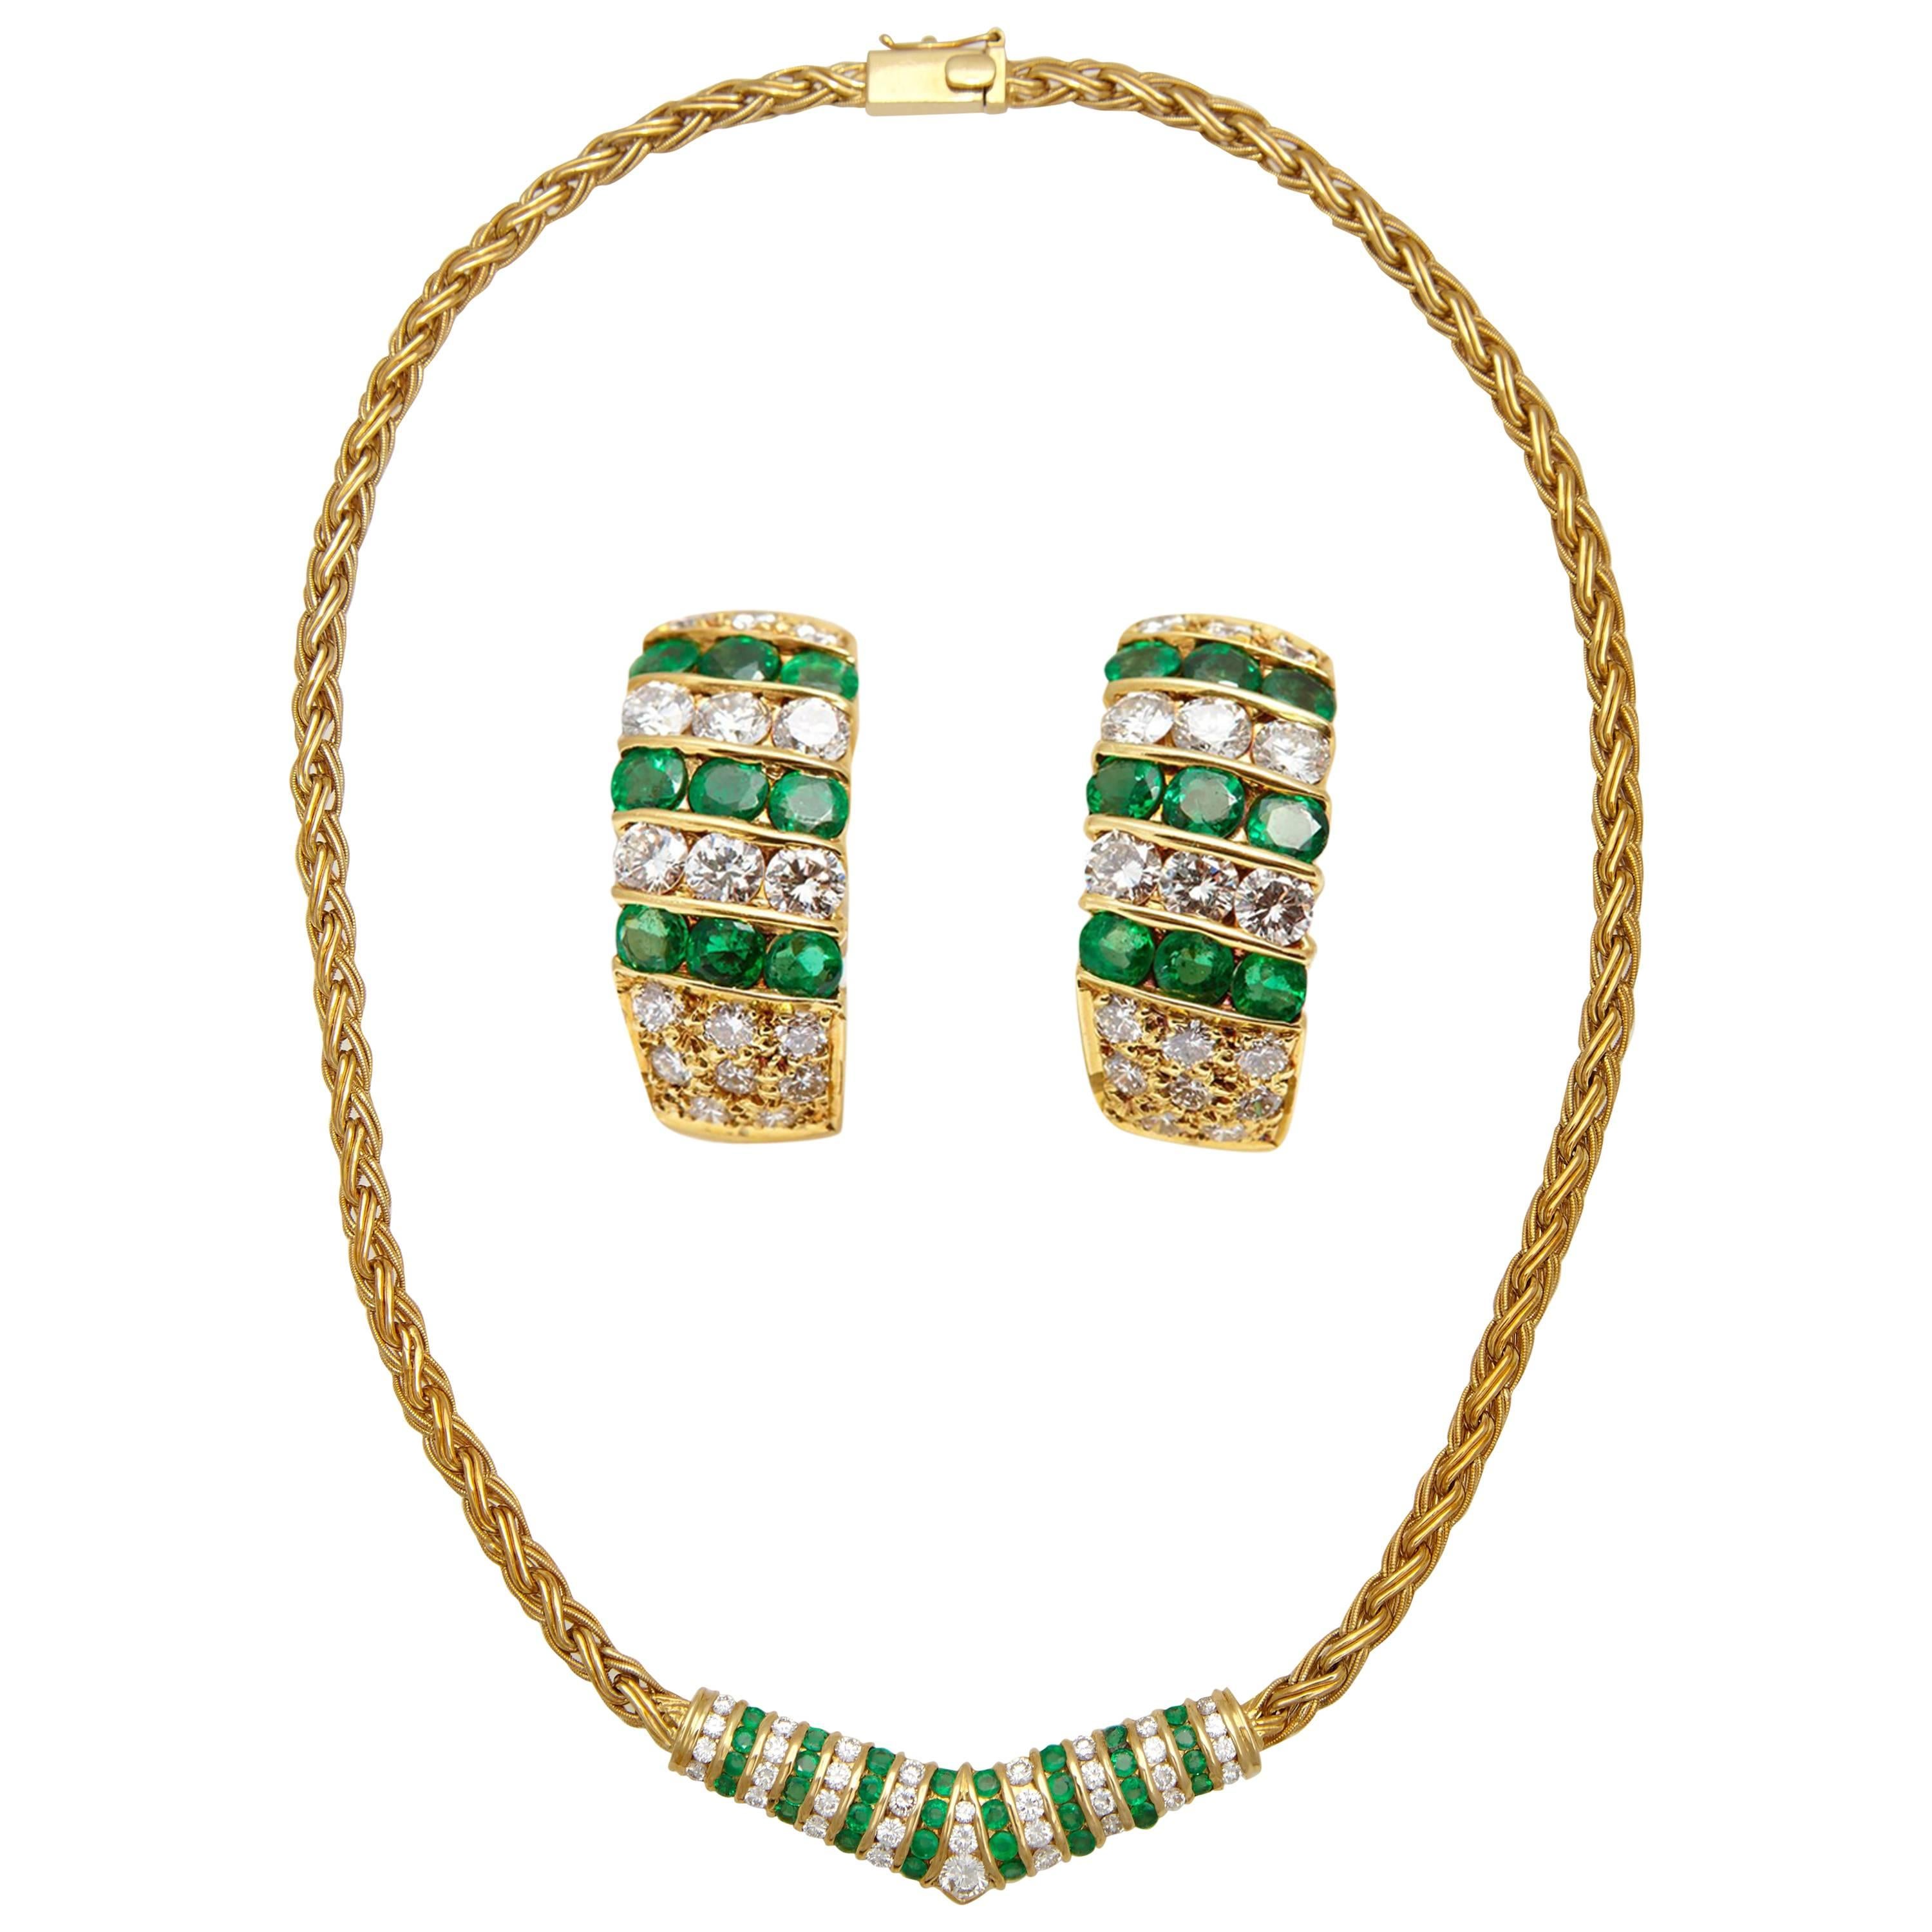 Matching Set 18 Karat Gold Diamonds Emeralds Necklace and Earrings For Sale